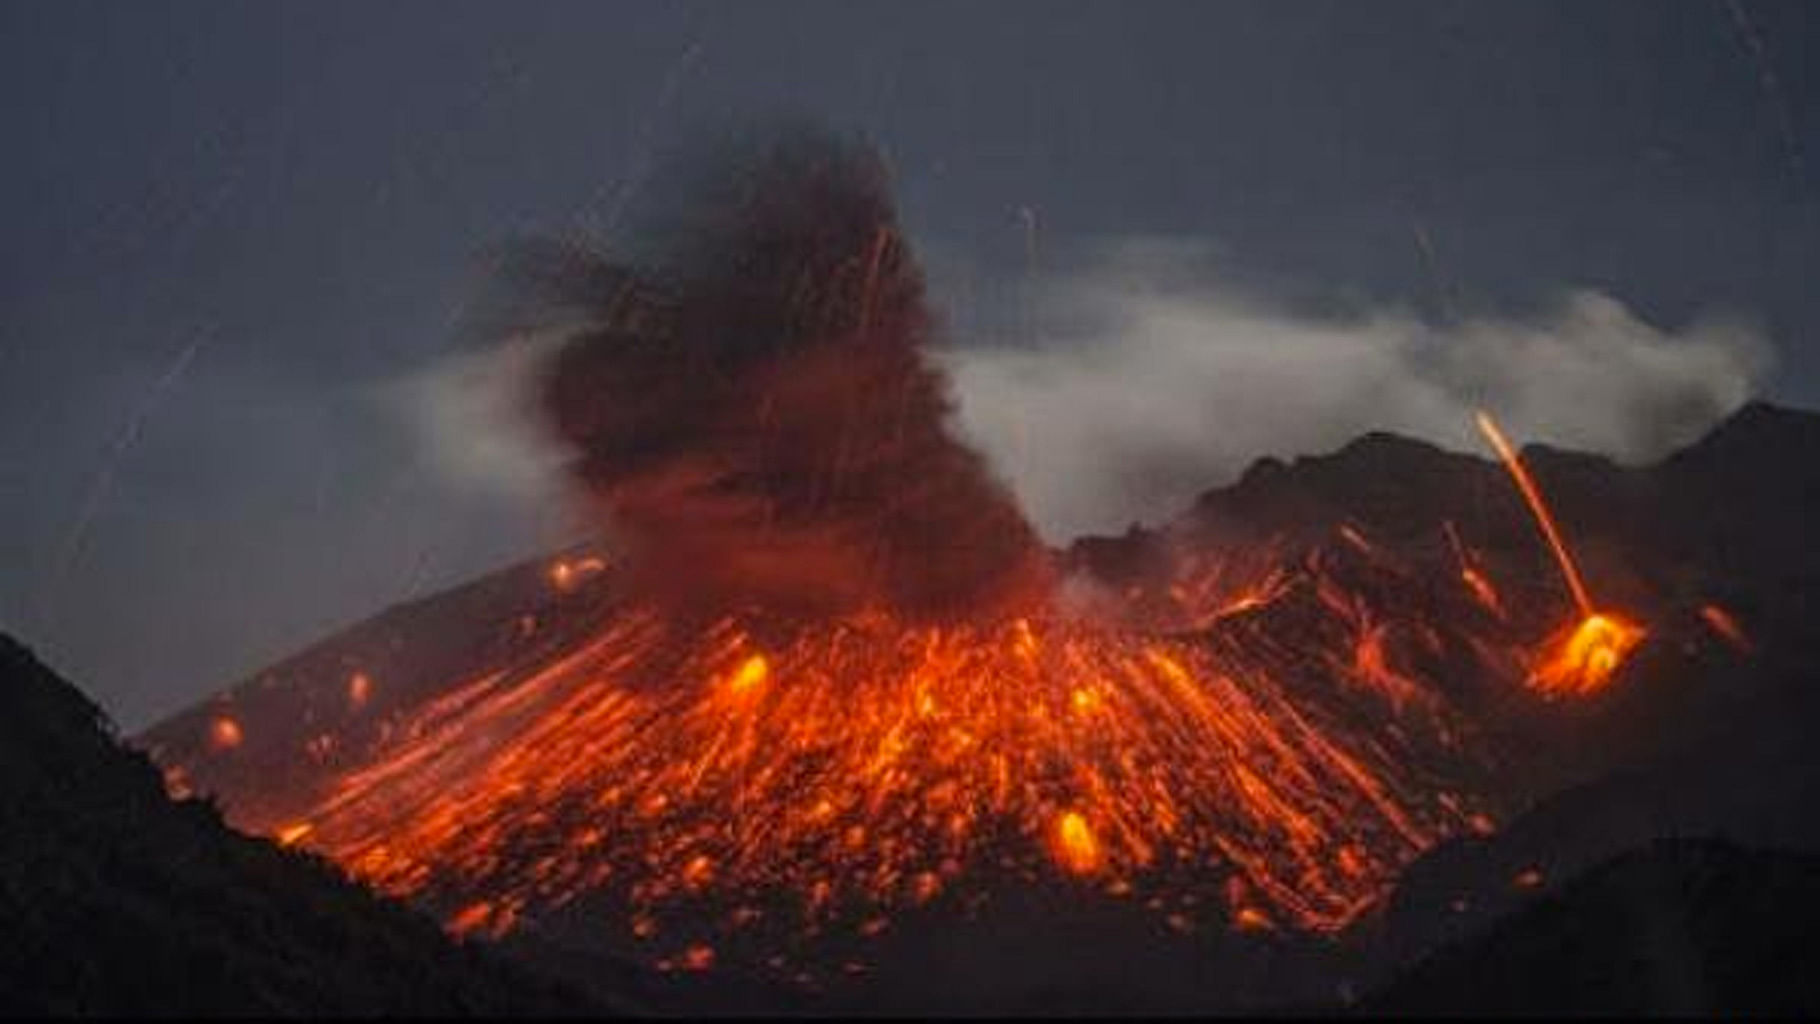 The Sakurajima volcano in southern Japan, located 30 miles from a nuclear plant, has erupted, sending lava flowing down its slope. (Photo Courtesy: Twitter/<a href="https://twitter.com/search?f=images&amp;vertical=news&amp;q=volcano&amp;src=tyah">@eUpdateNG</a>)